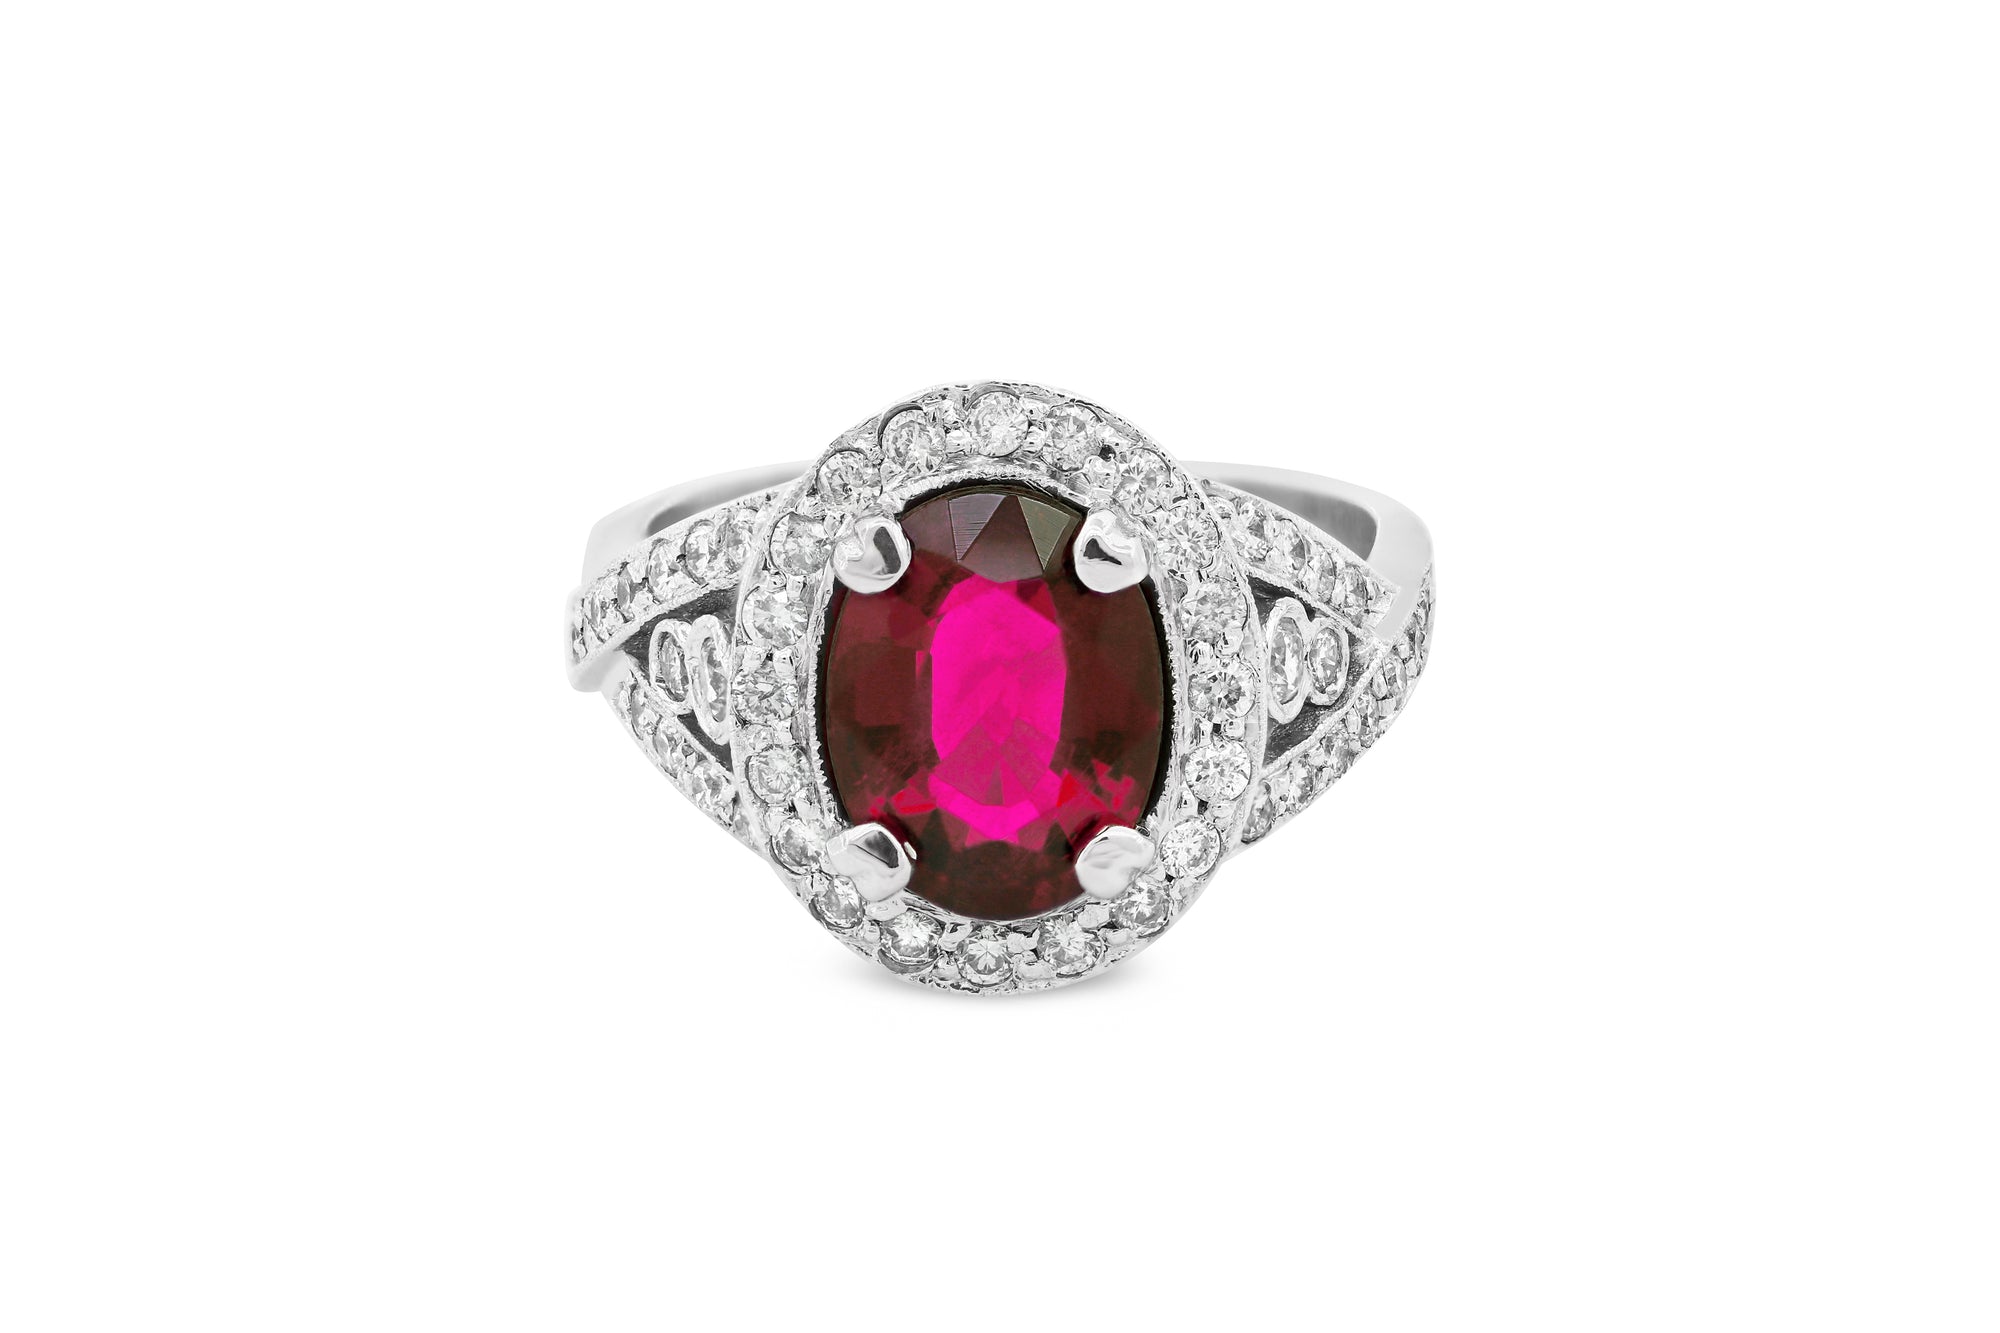 1.88 CT Oval Pink Tourmaline Diamond Ring 1.07 CT TW 14K White Gold PTR002 - NorthandSouthJewelry